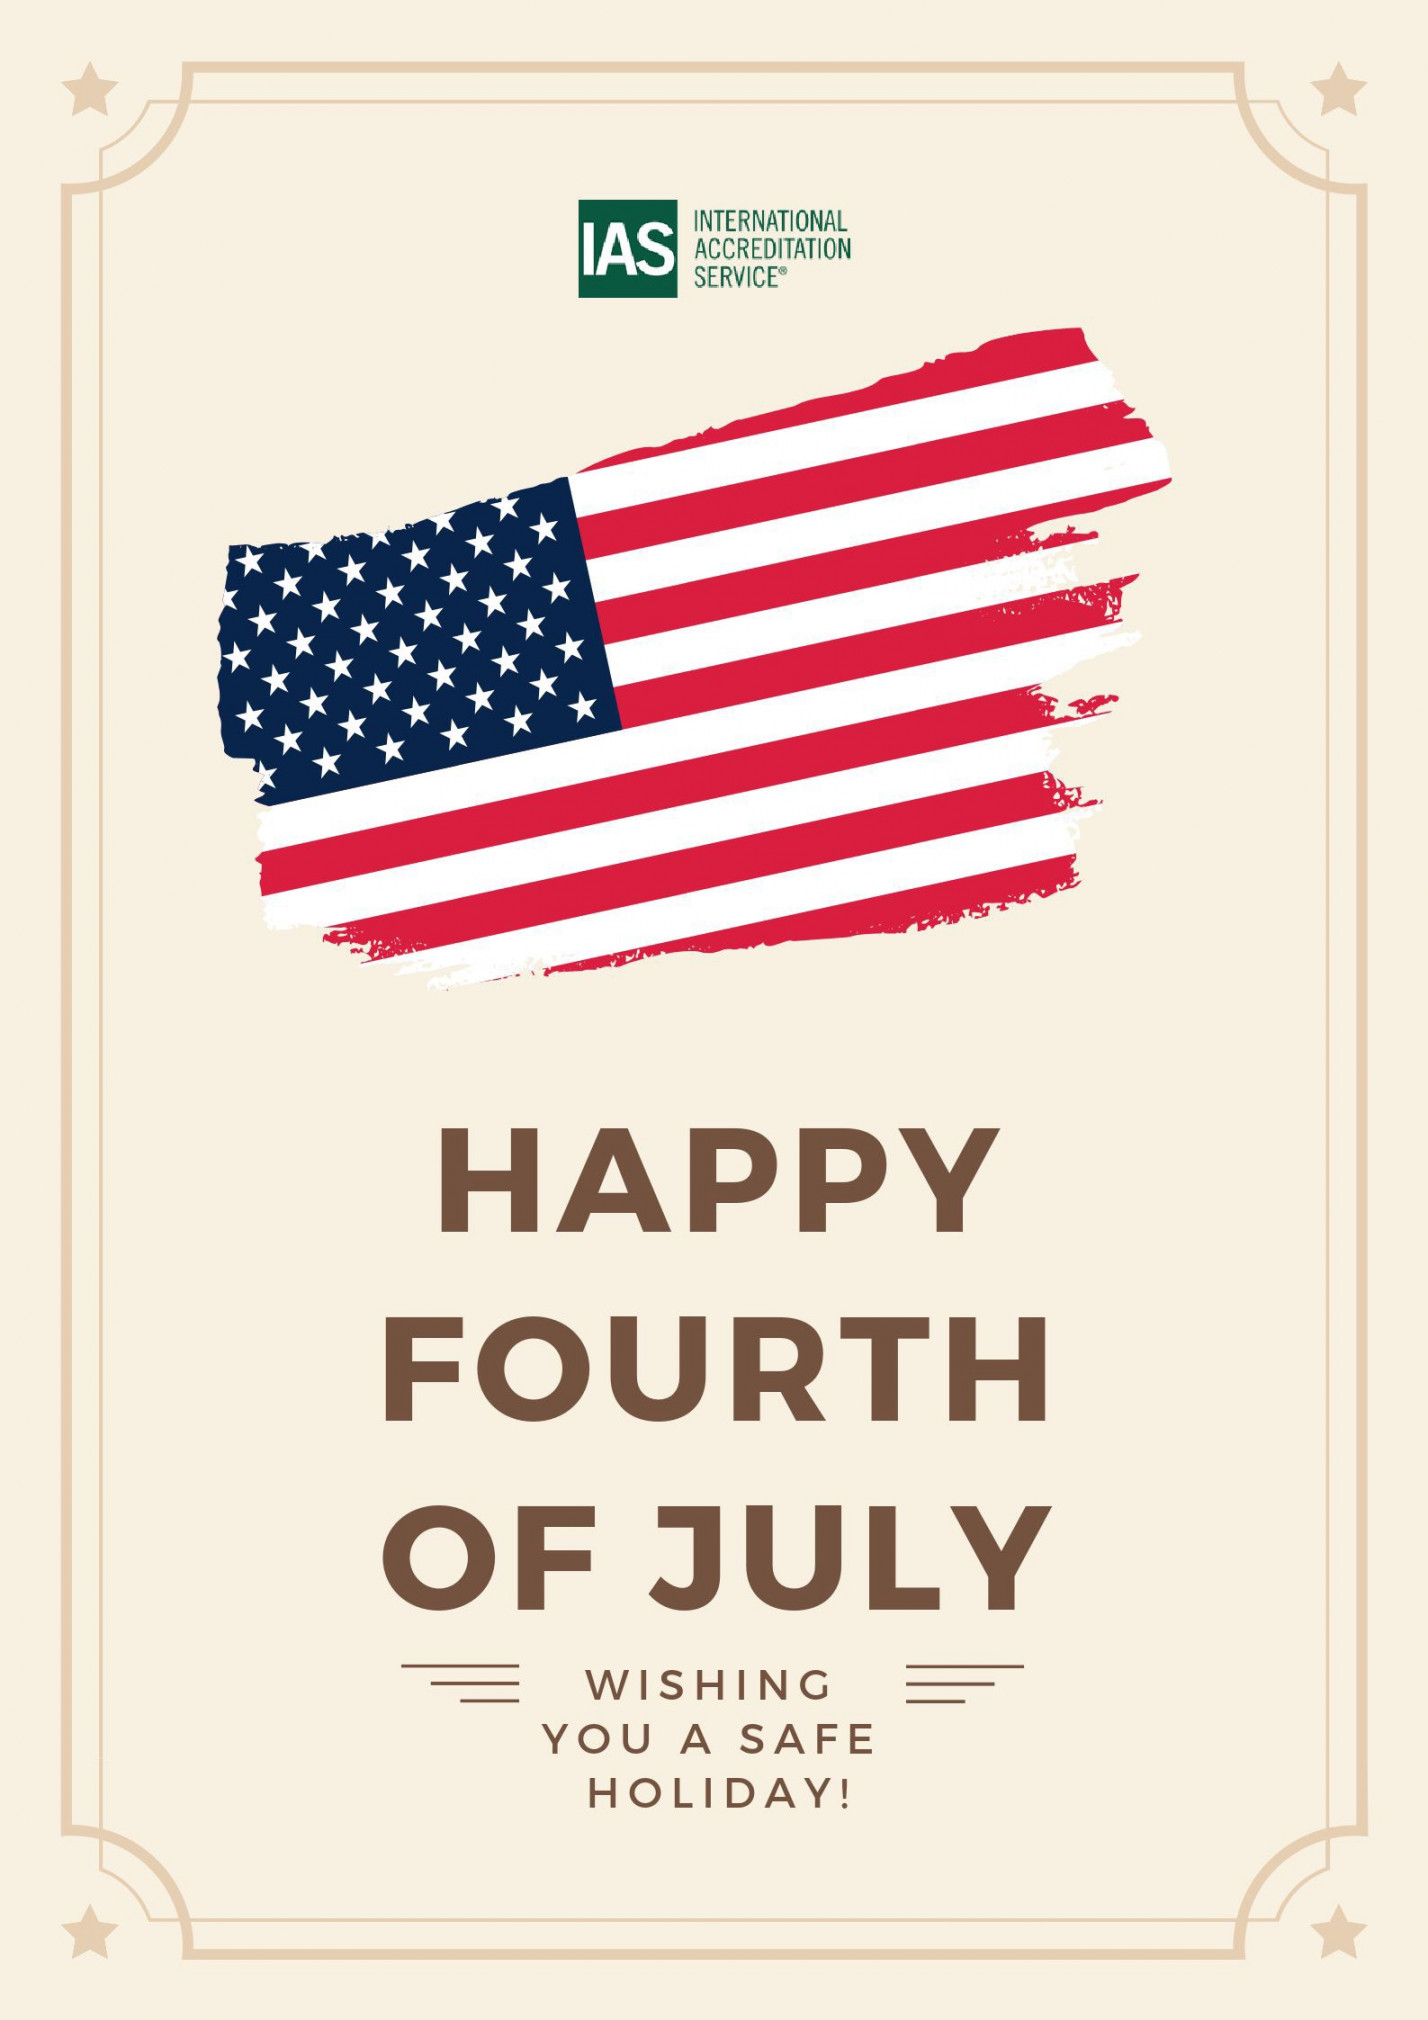 Fourth of July Holiday Wishes and Closure Notice - International